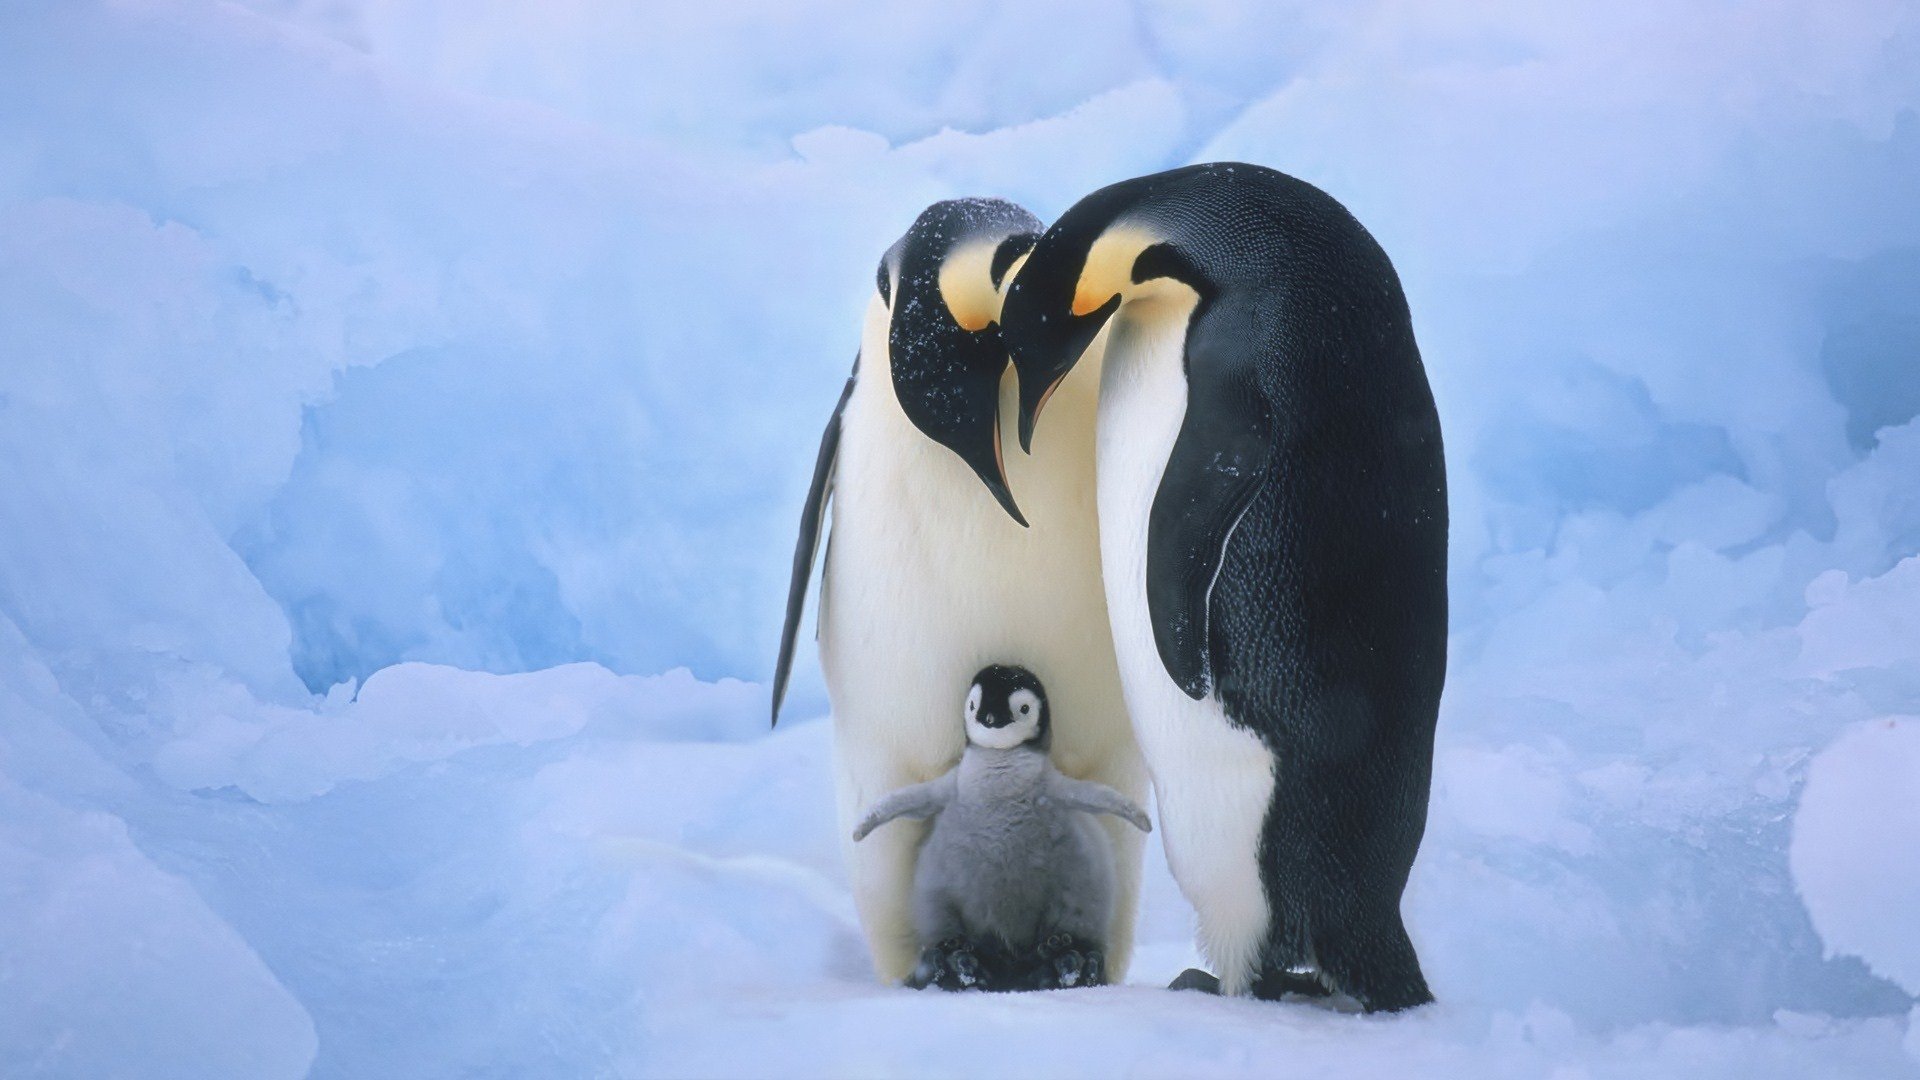 Penguin Wallpapers and Background Images   stmednet